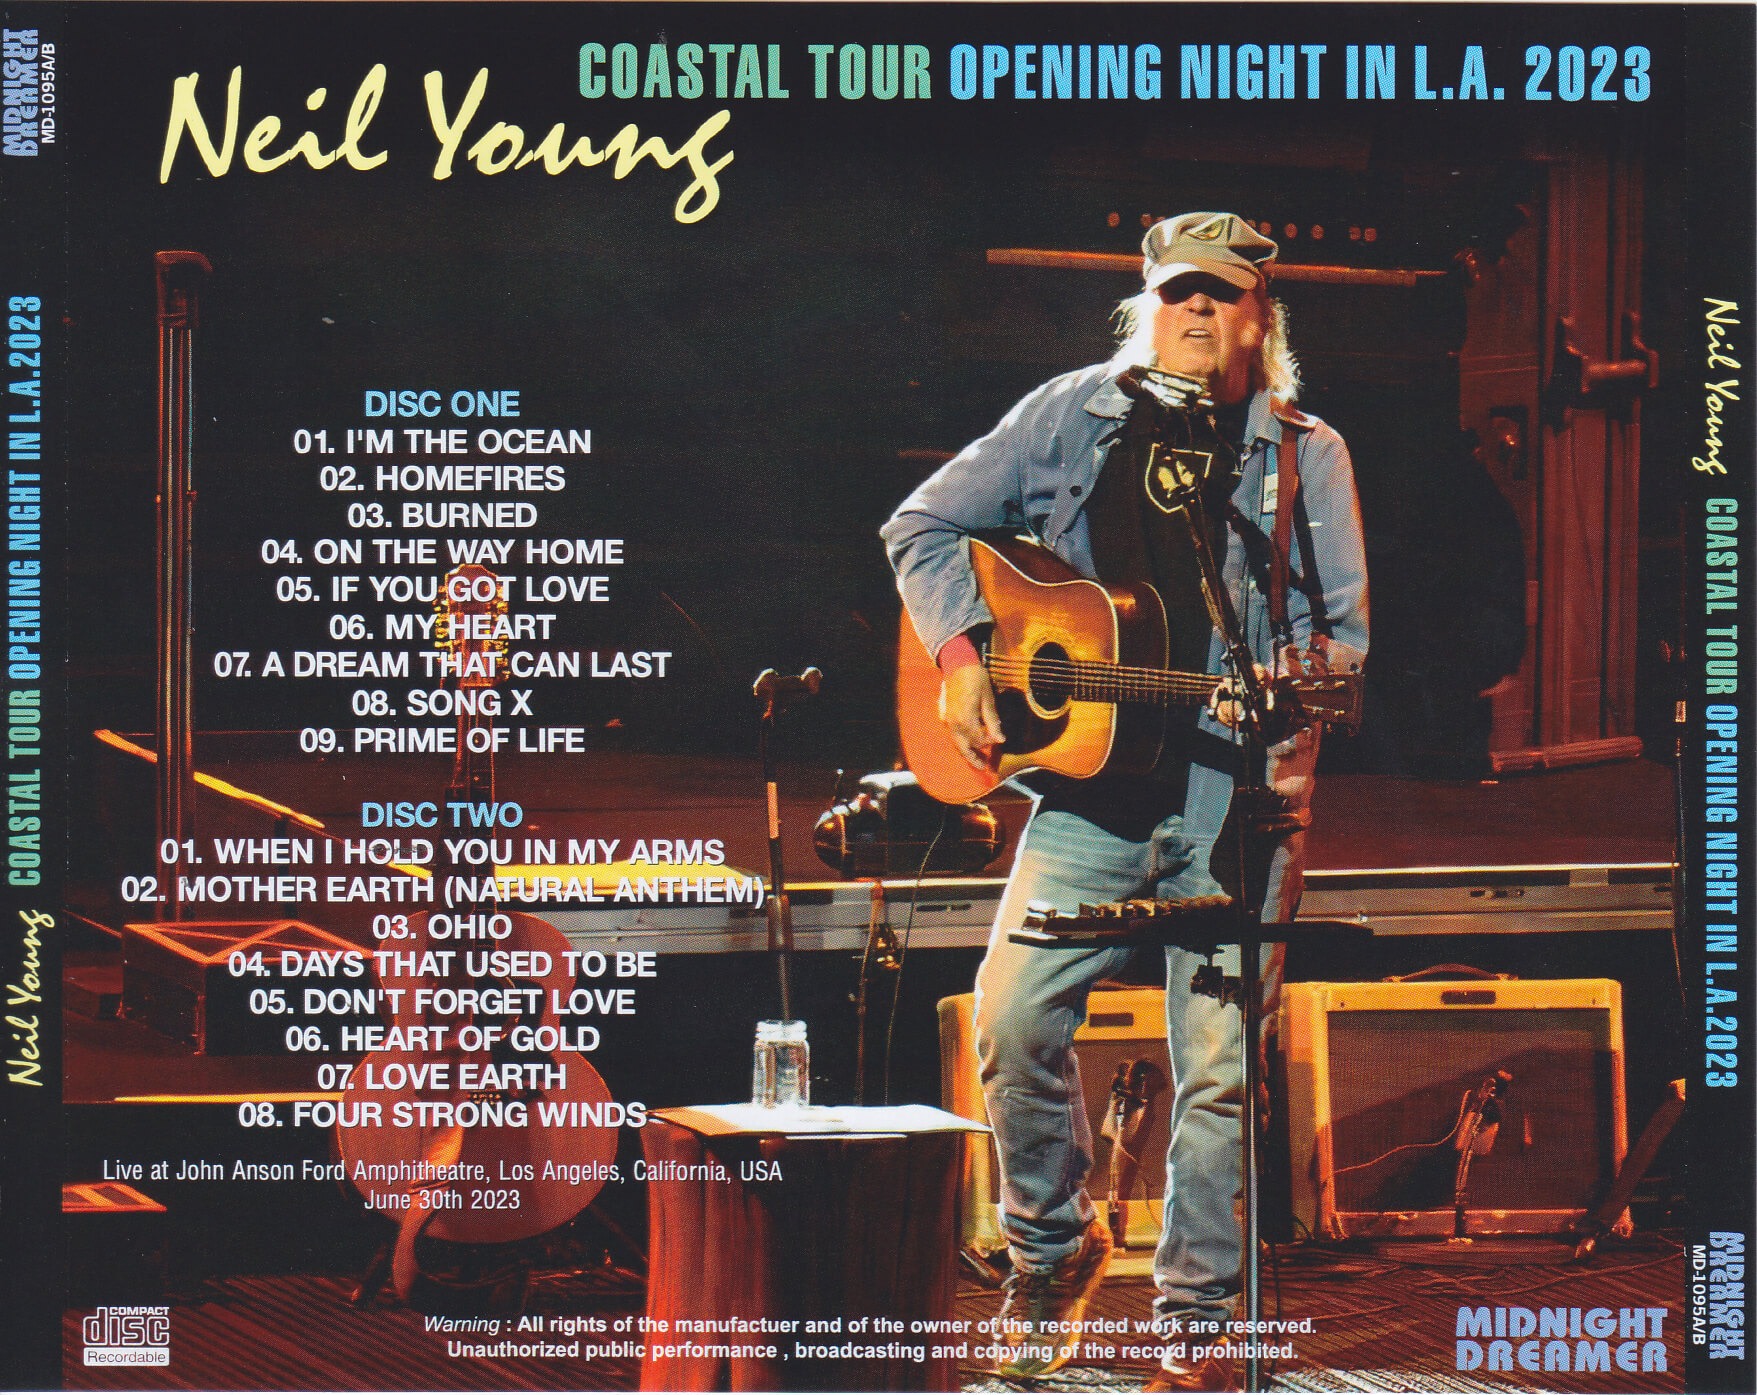 Neil Young / Coastal Tour Opening Night in LA 2023 / 2CDR GiGinJapan